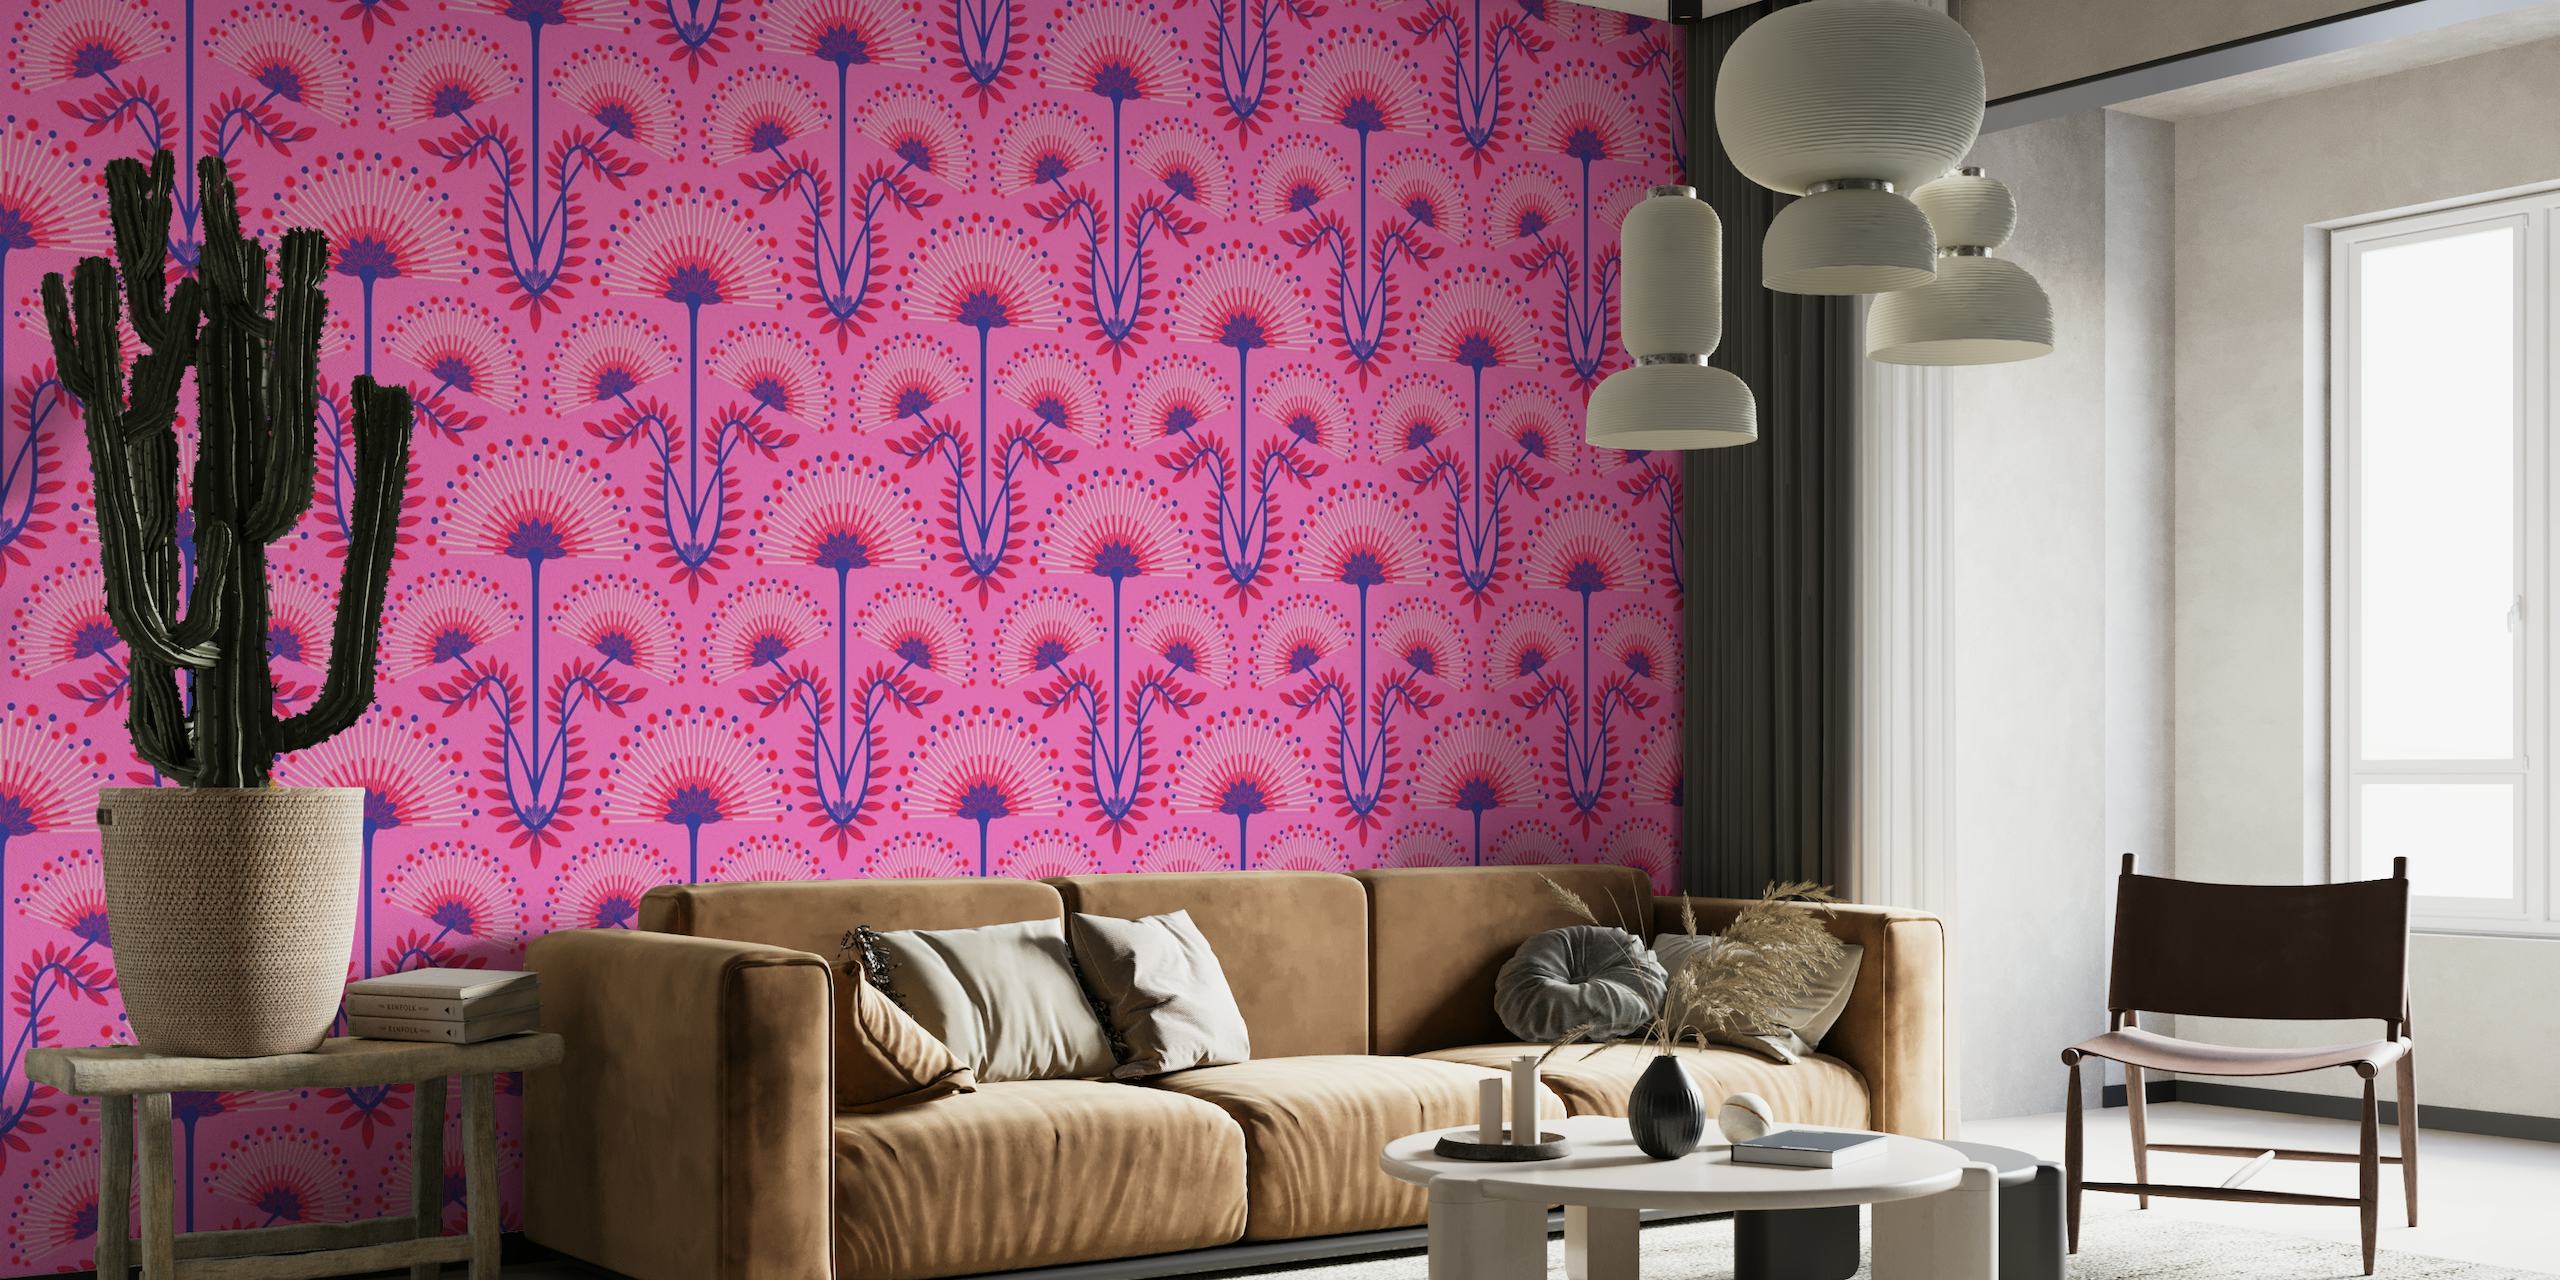 MIMOSA Art Deco Floral - Fuchsia Pink - Large tapete